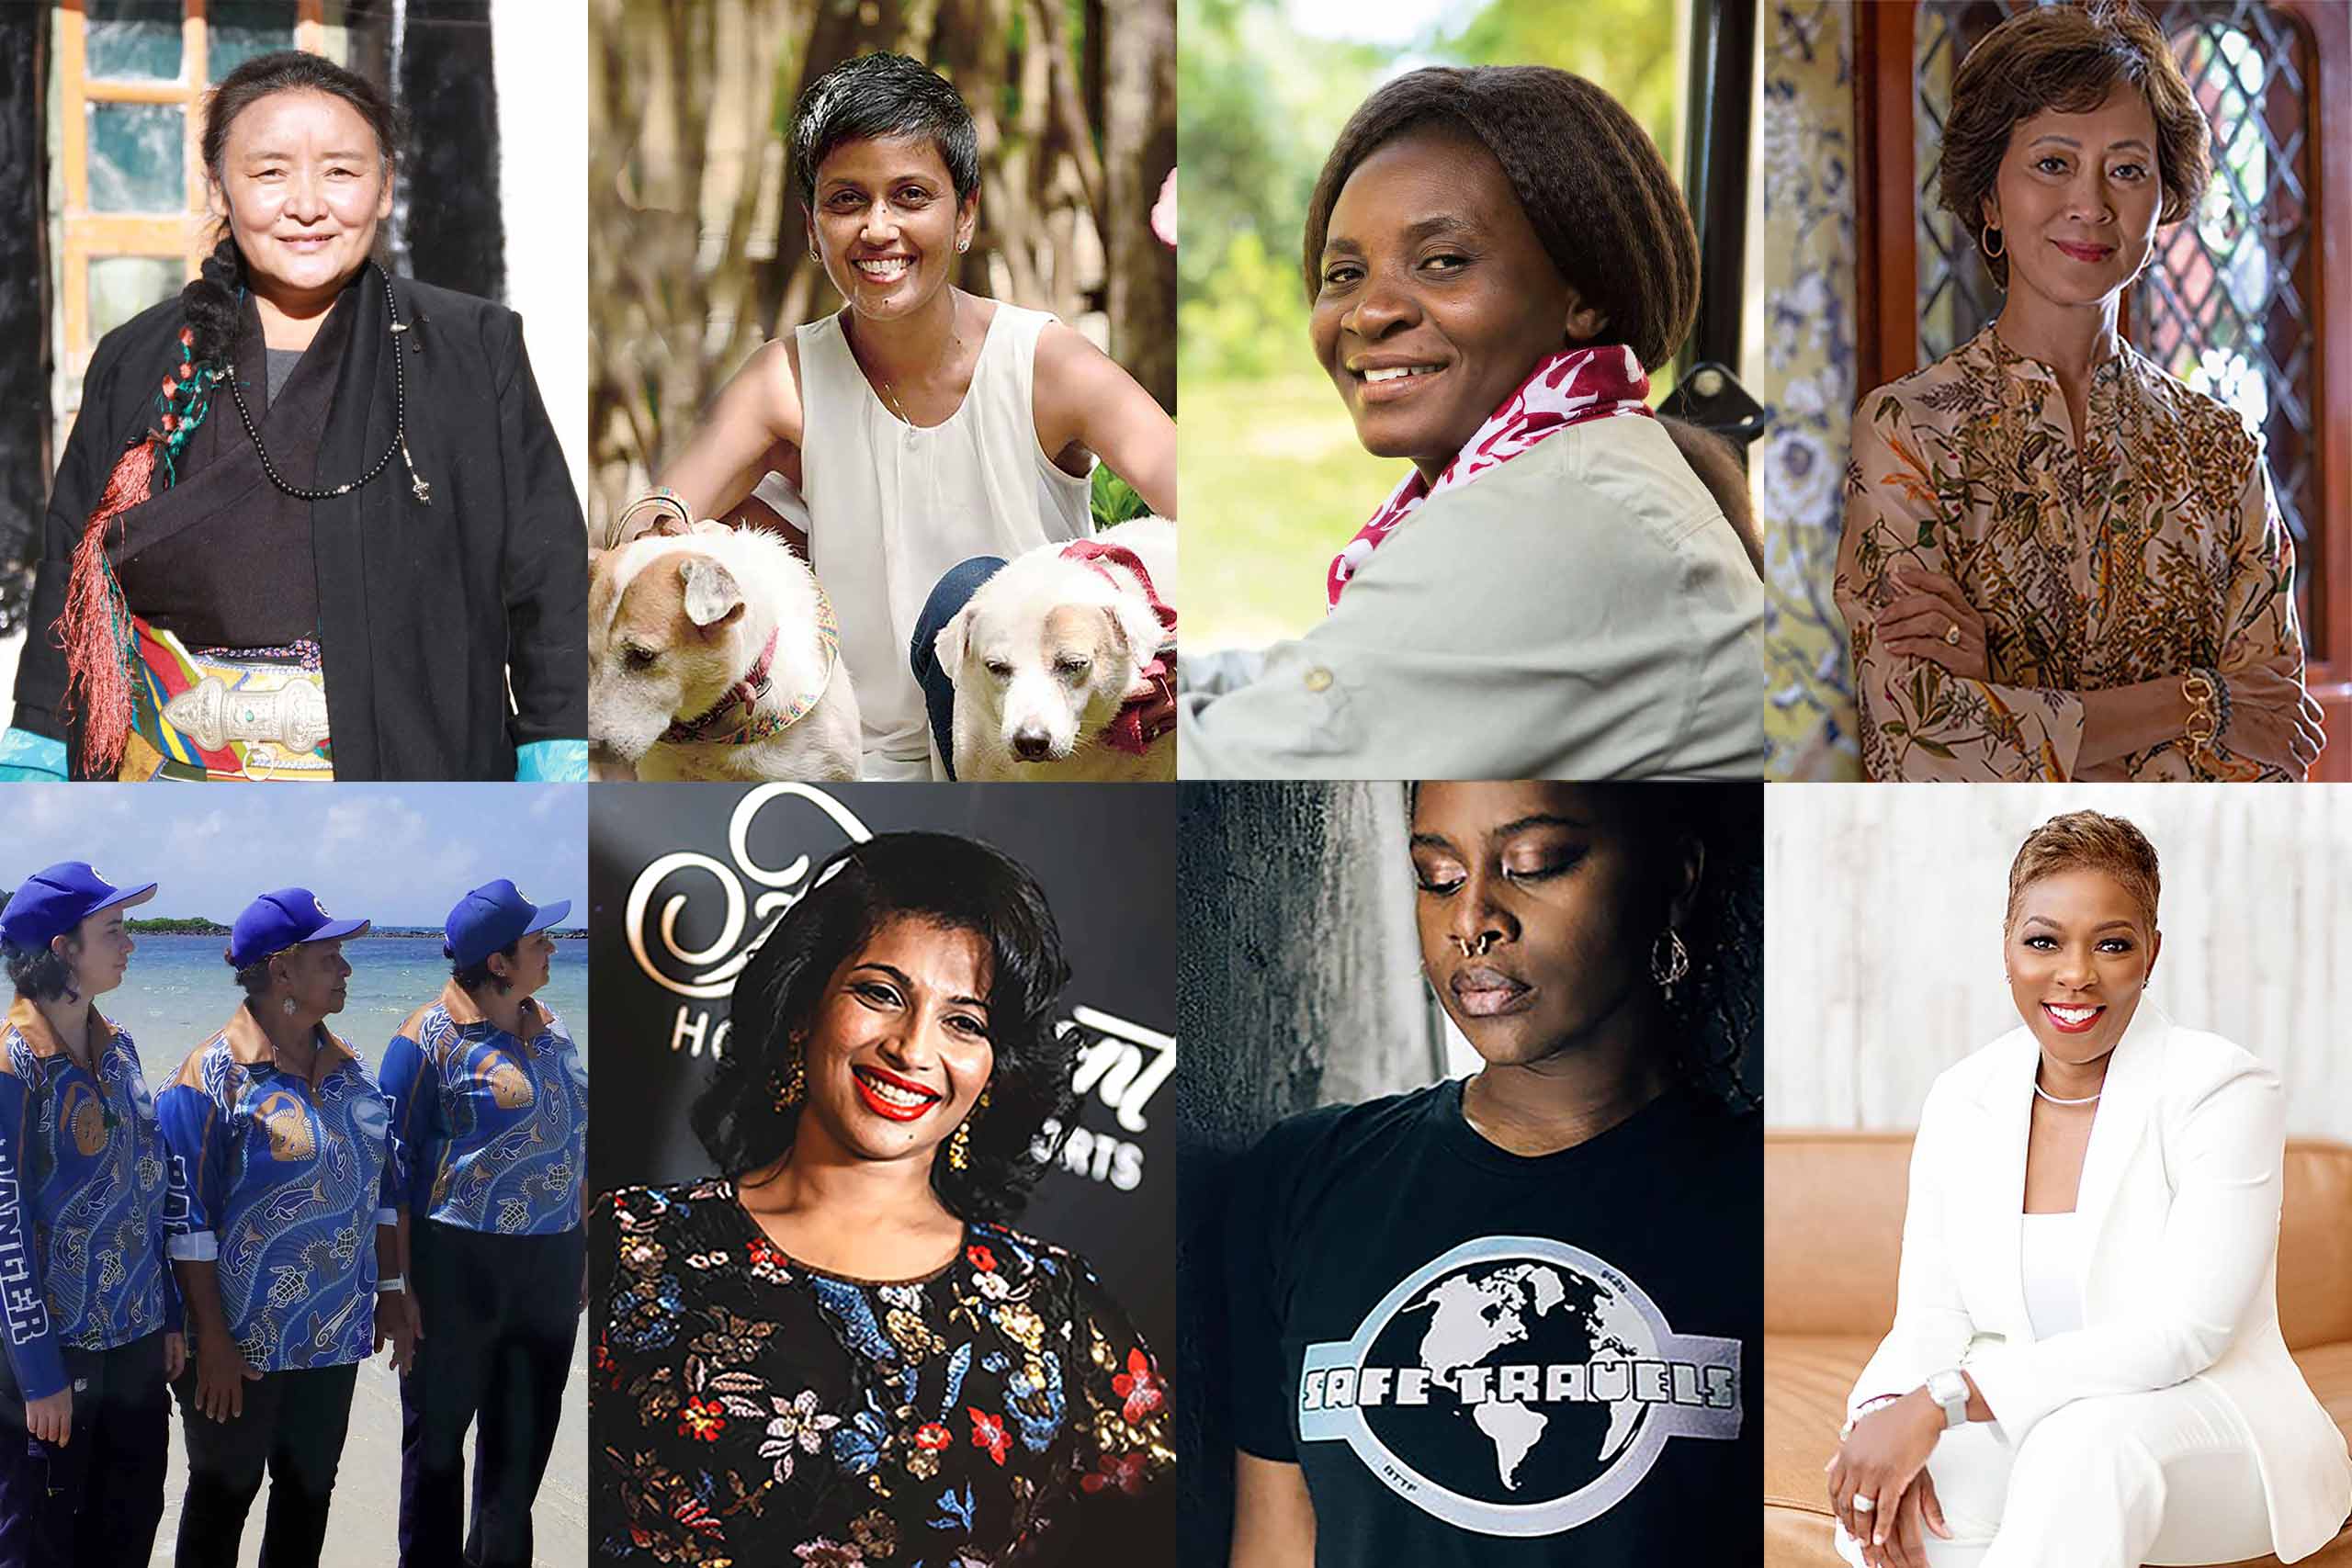 Women of colour / BIPOC female leaders in travel